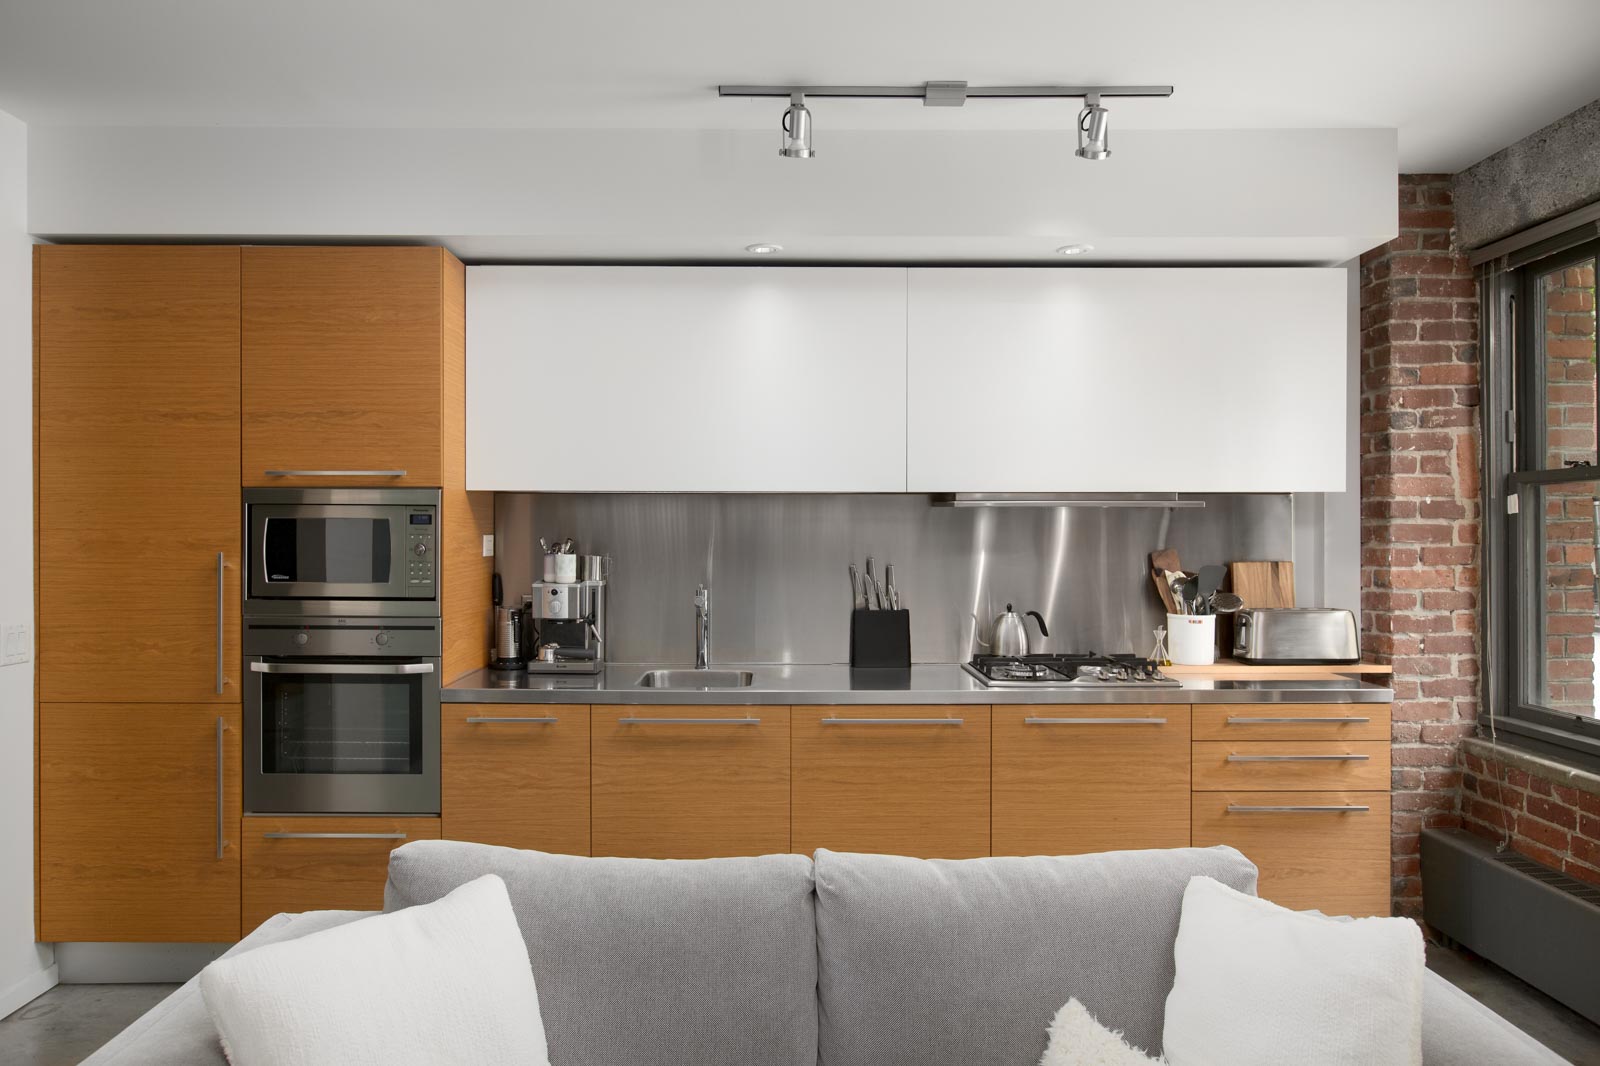 spacious kitchen with modern high-end appliances such as stainless steel sink, fridge, stove, oven, and microwave with sleek cabinet storage and ceiling light fixtures in a rental condo provided by Birds Nest Properties in Vancouver